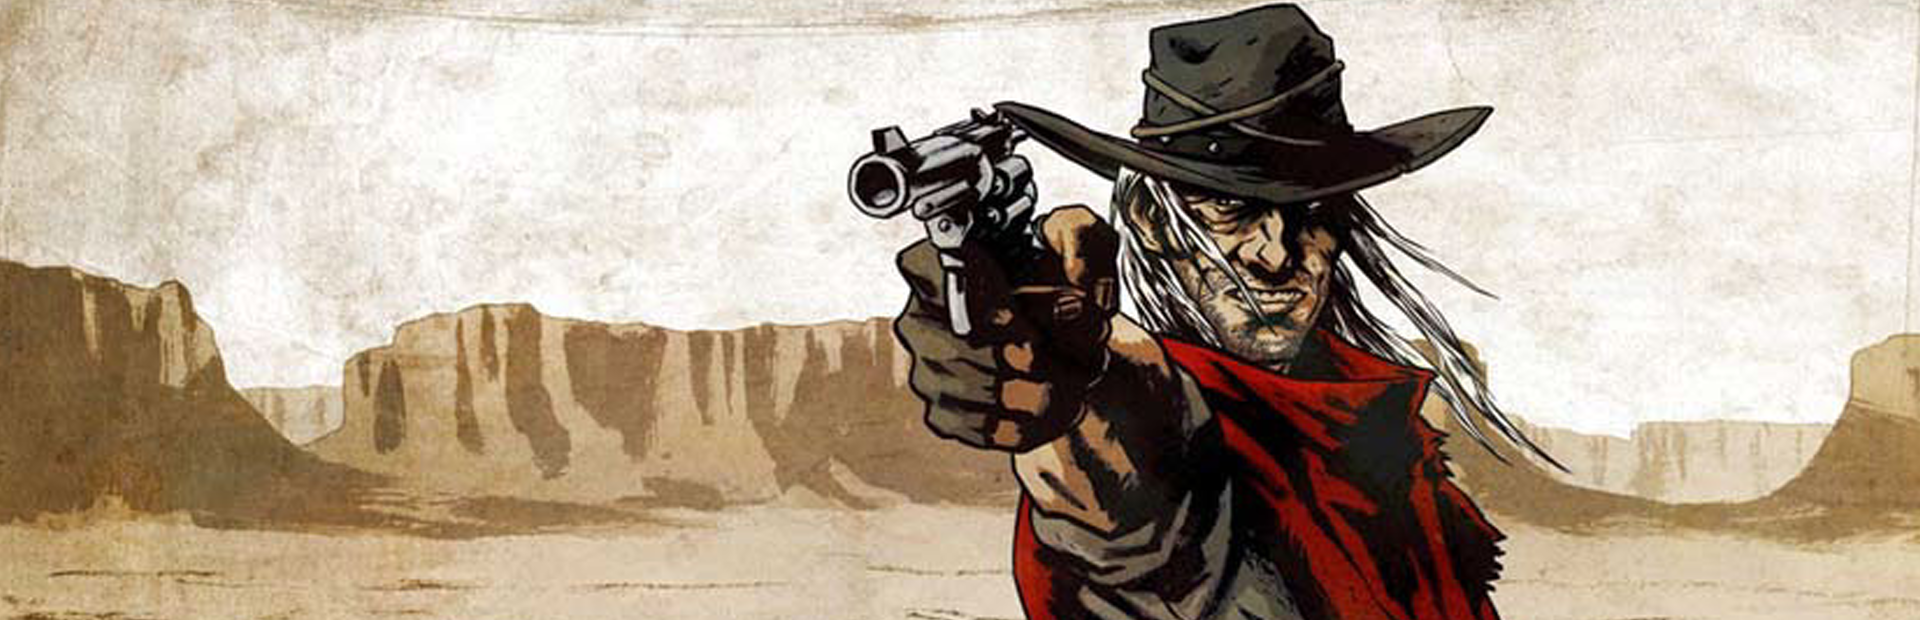 Call of juarez gunslinger steam is required фото 35